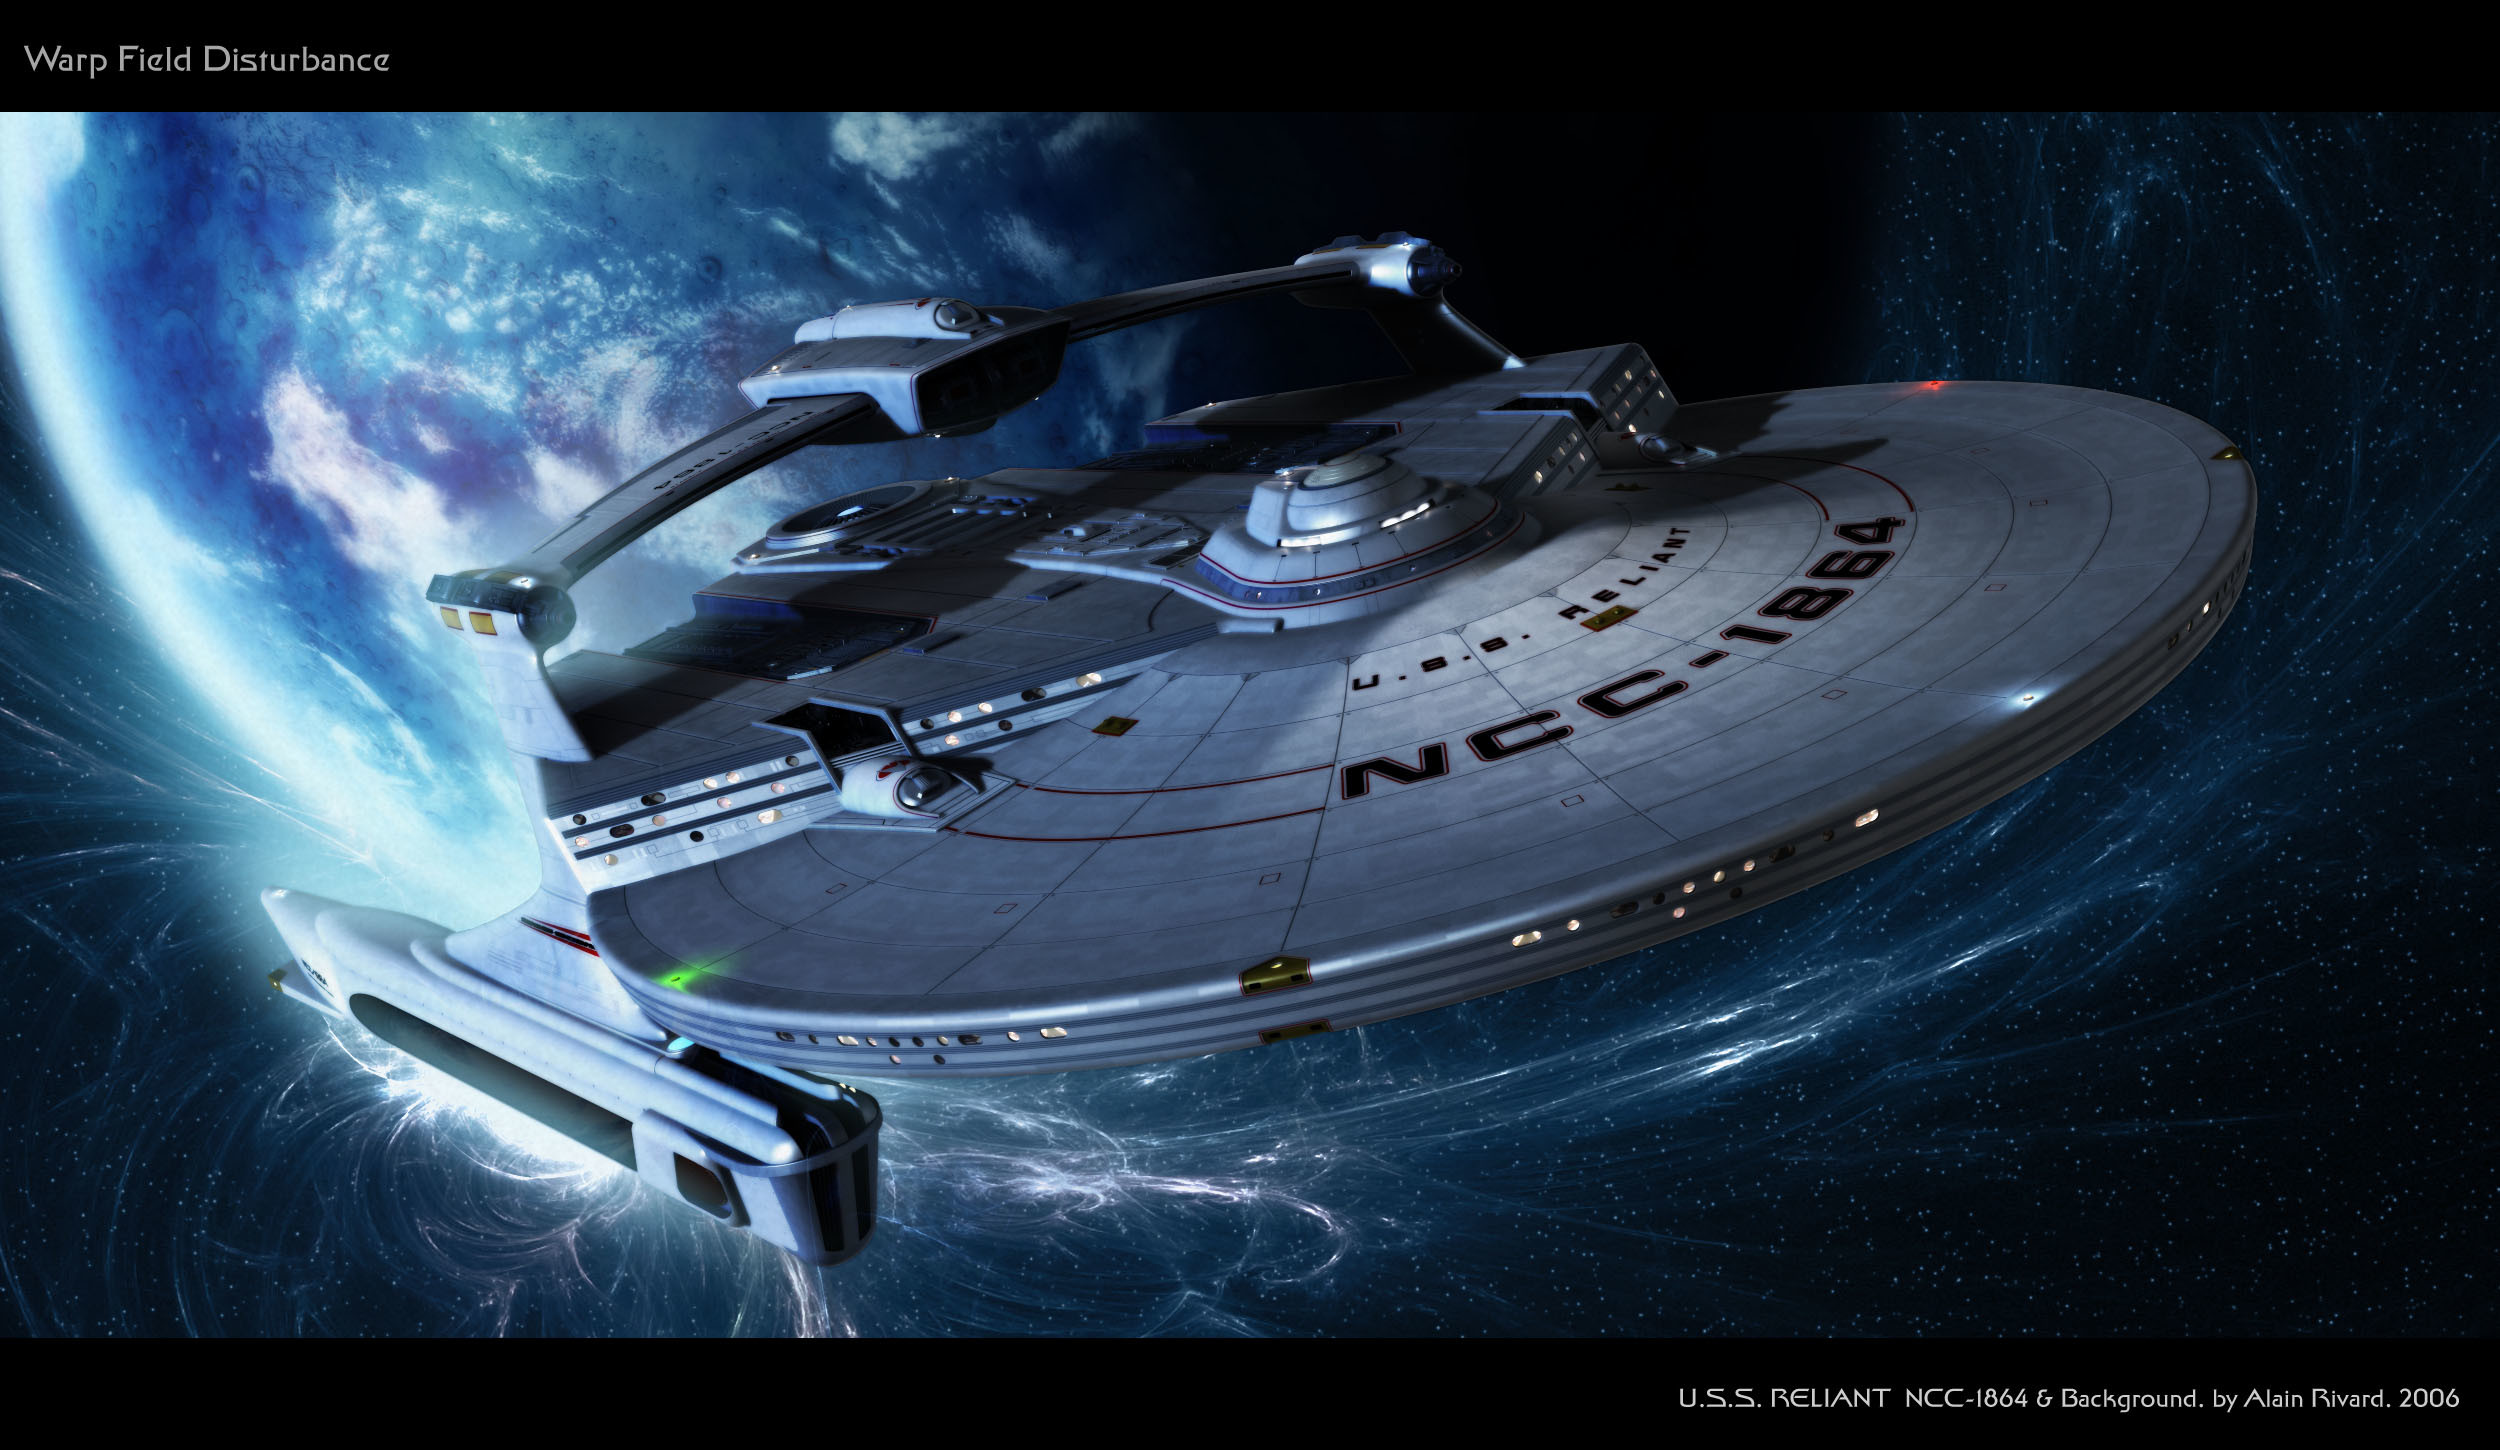 2500x1450 Star Trek wallpapers wallpaper images TV shows sci-fi pictures scifi